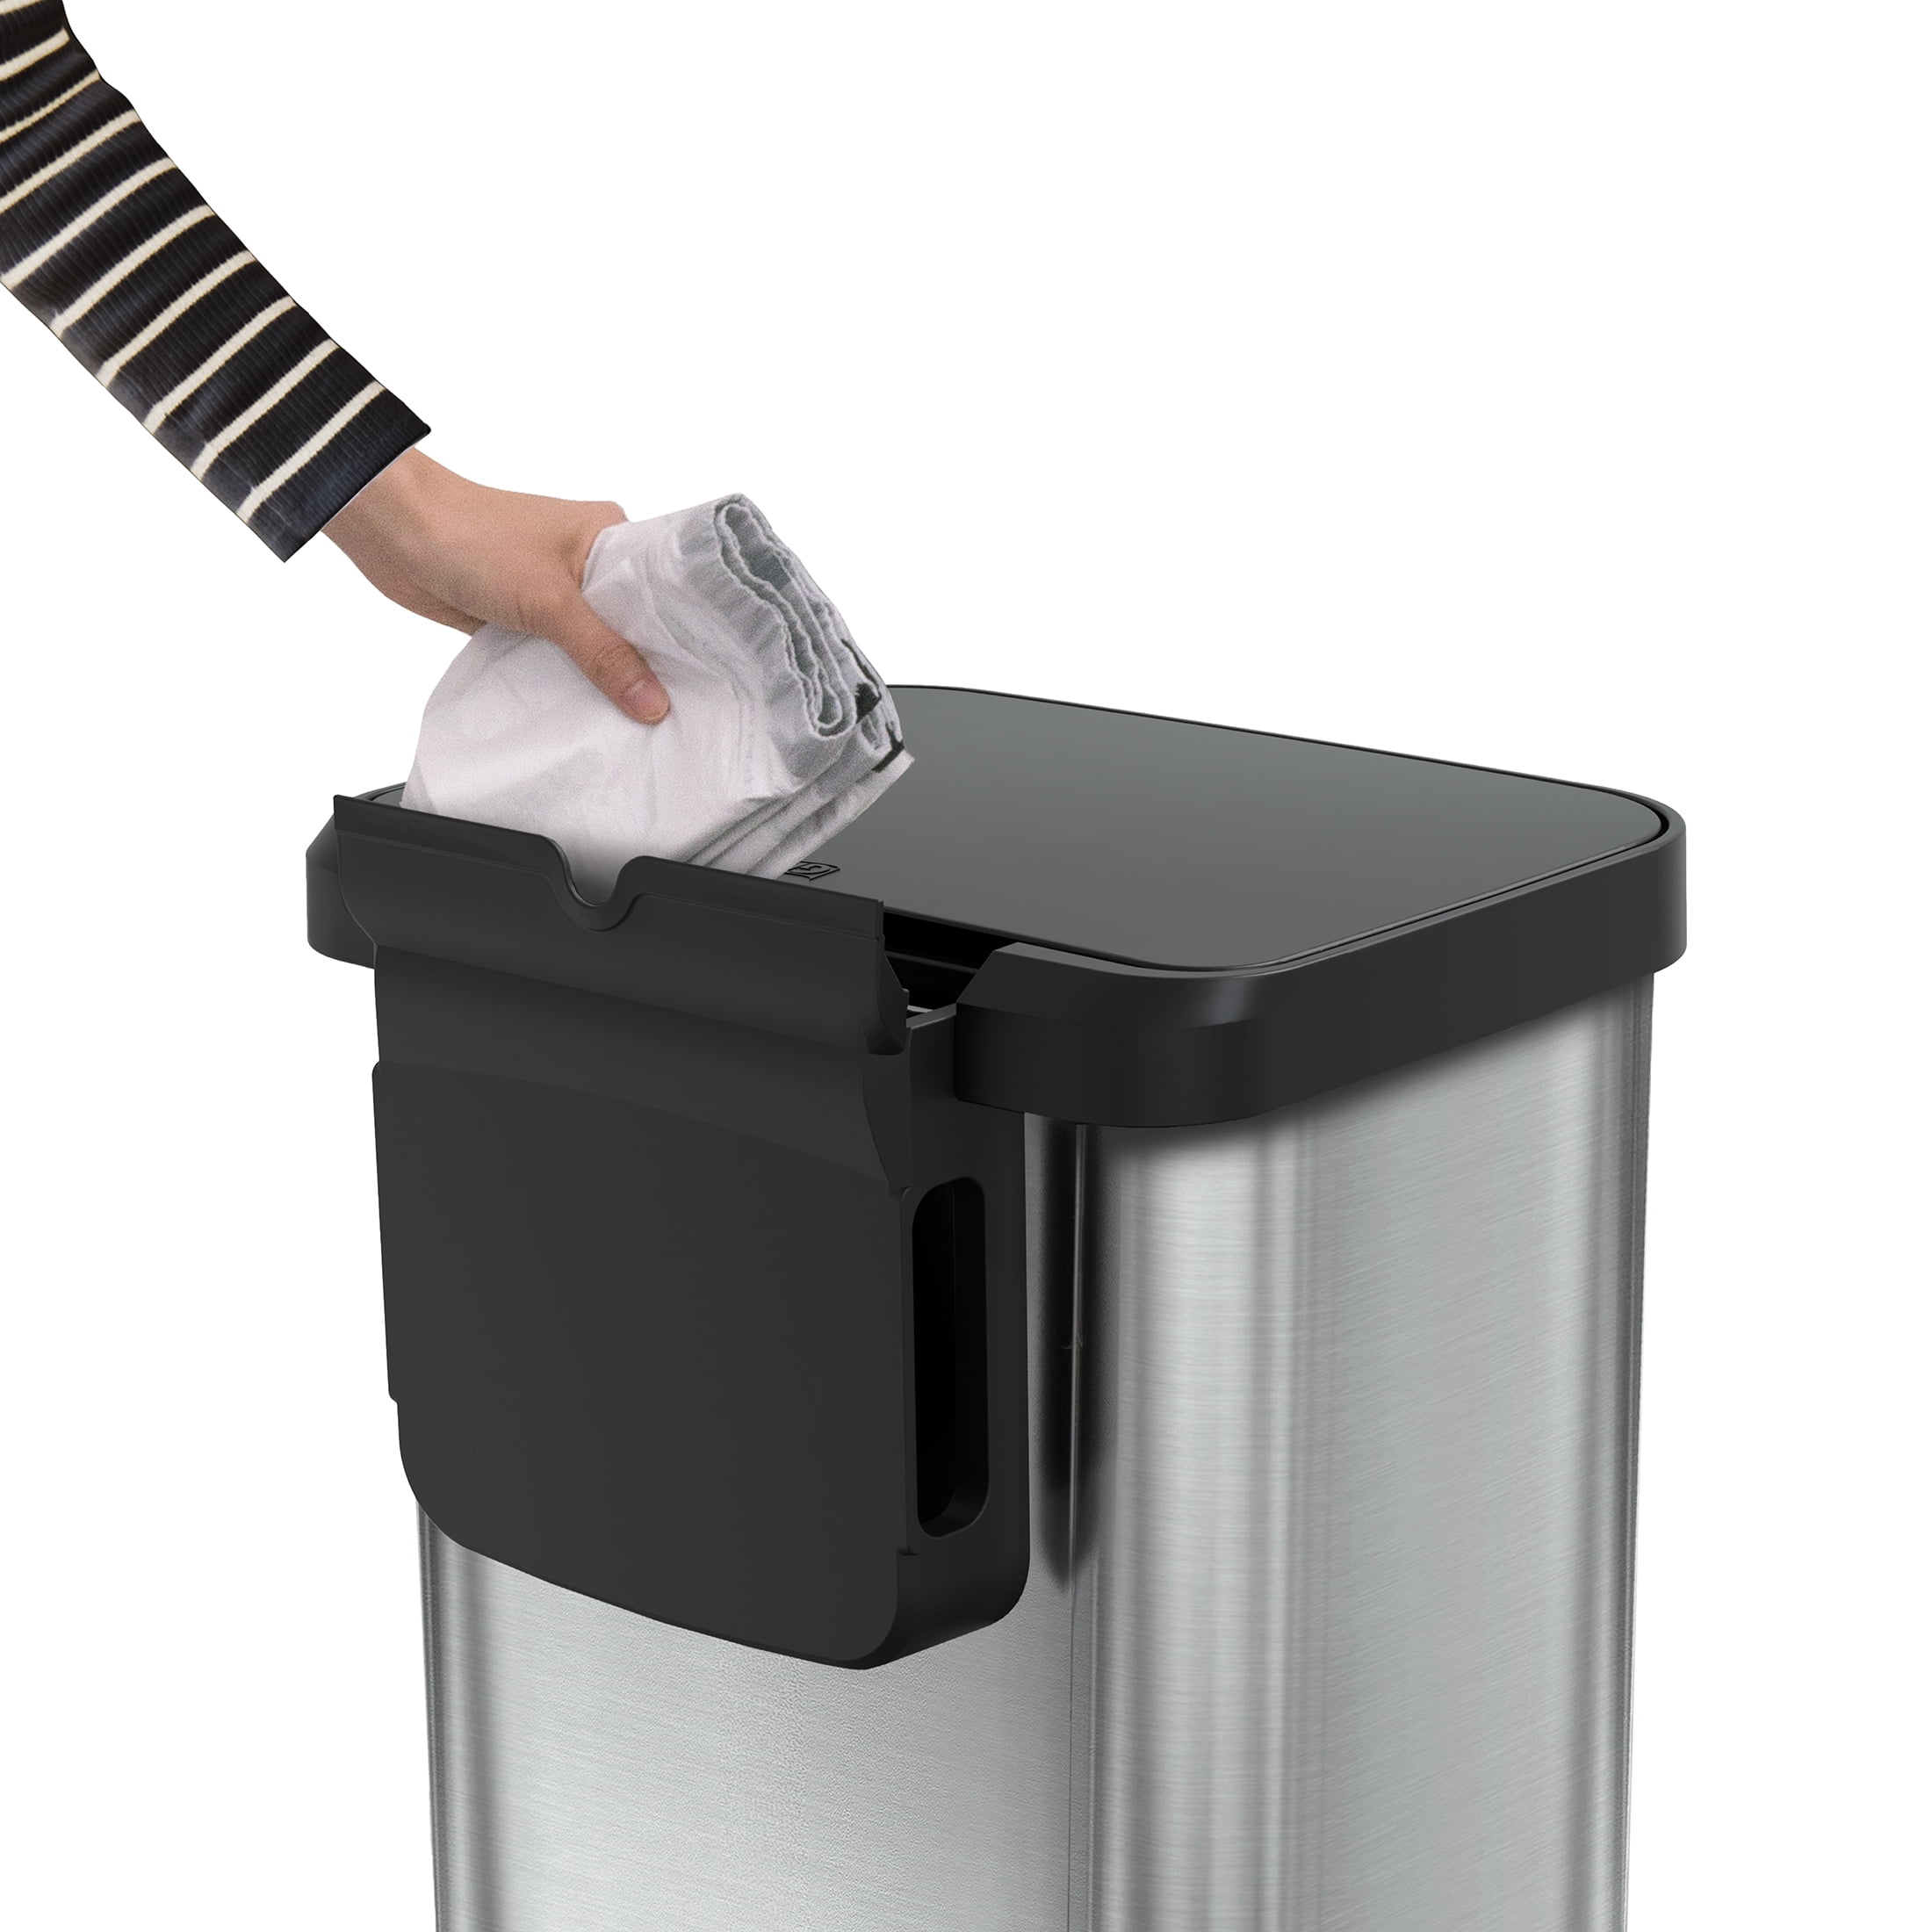 Glad 13g Stainless Steel Sensor Trash Can With Clorox Odor